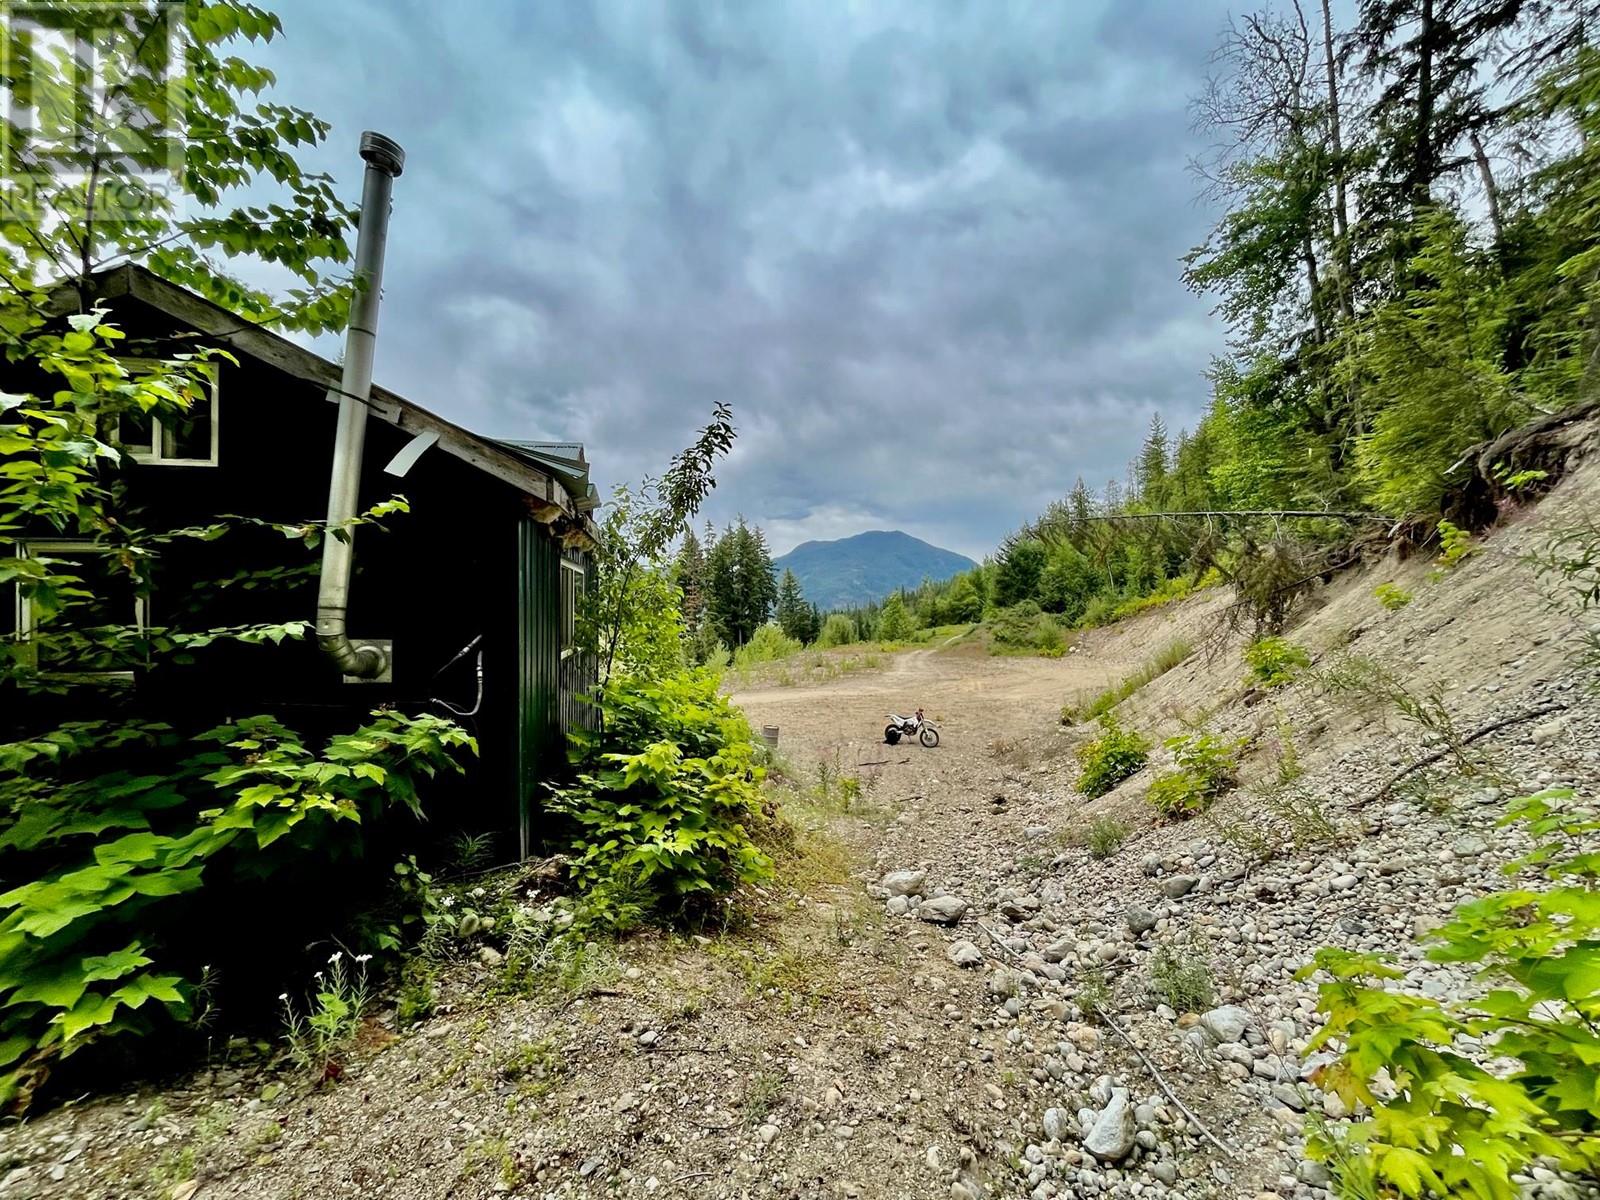  Lot 8 East Anstey Arm Bay, Sicamous